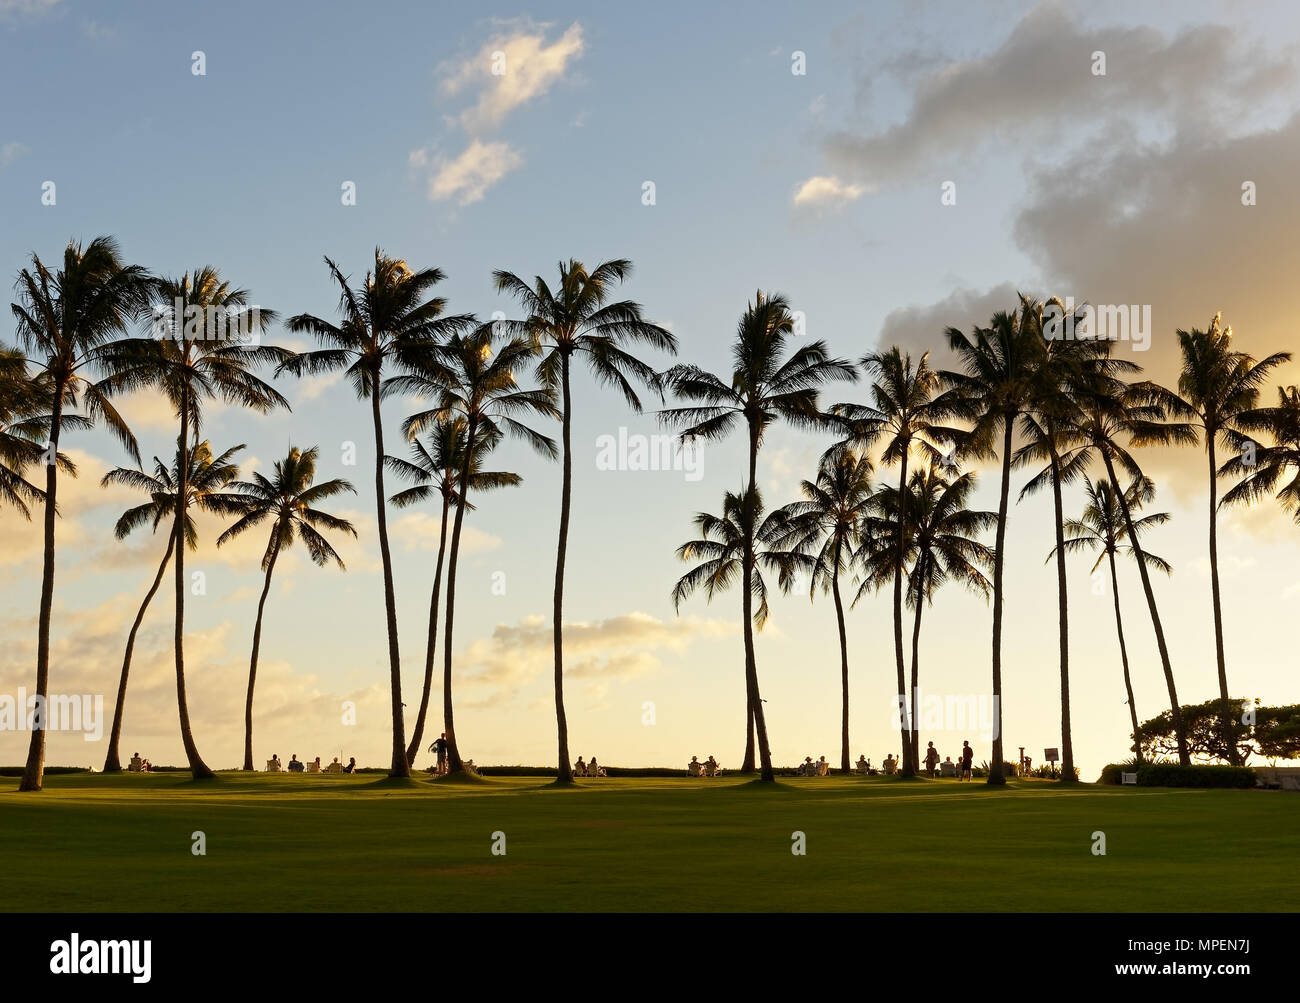 In a beach park vacationers sit in sun loungers under tall palm trees and watch the sunset and the evening light - Location: Hawaii Stock Photo